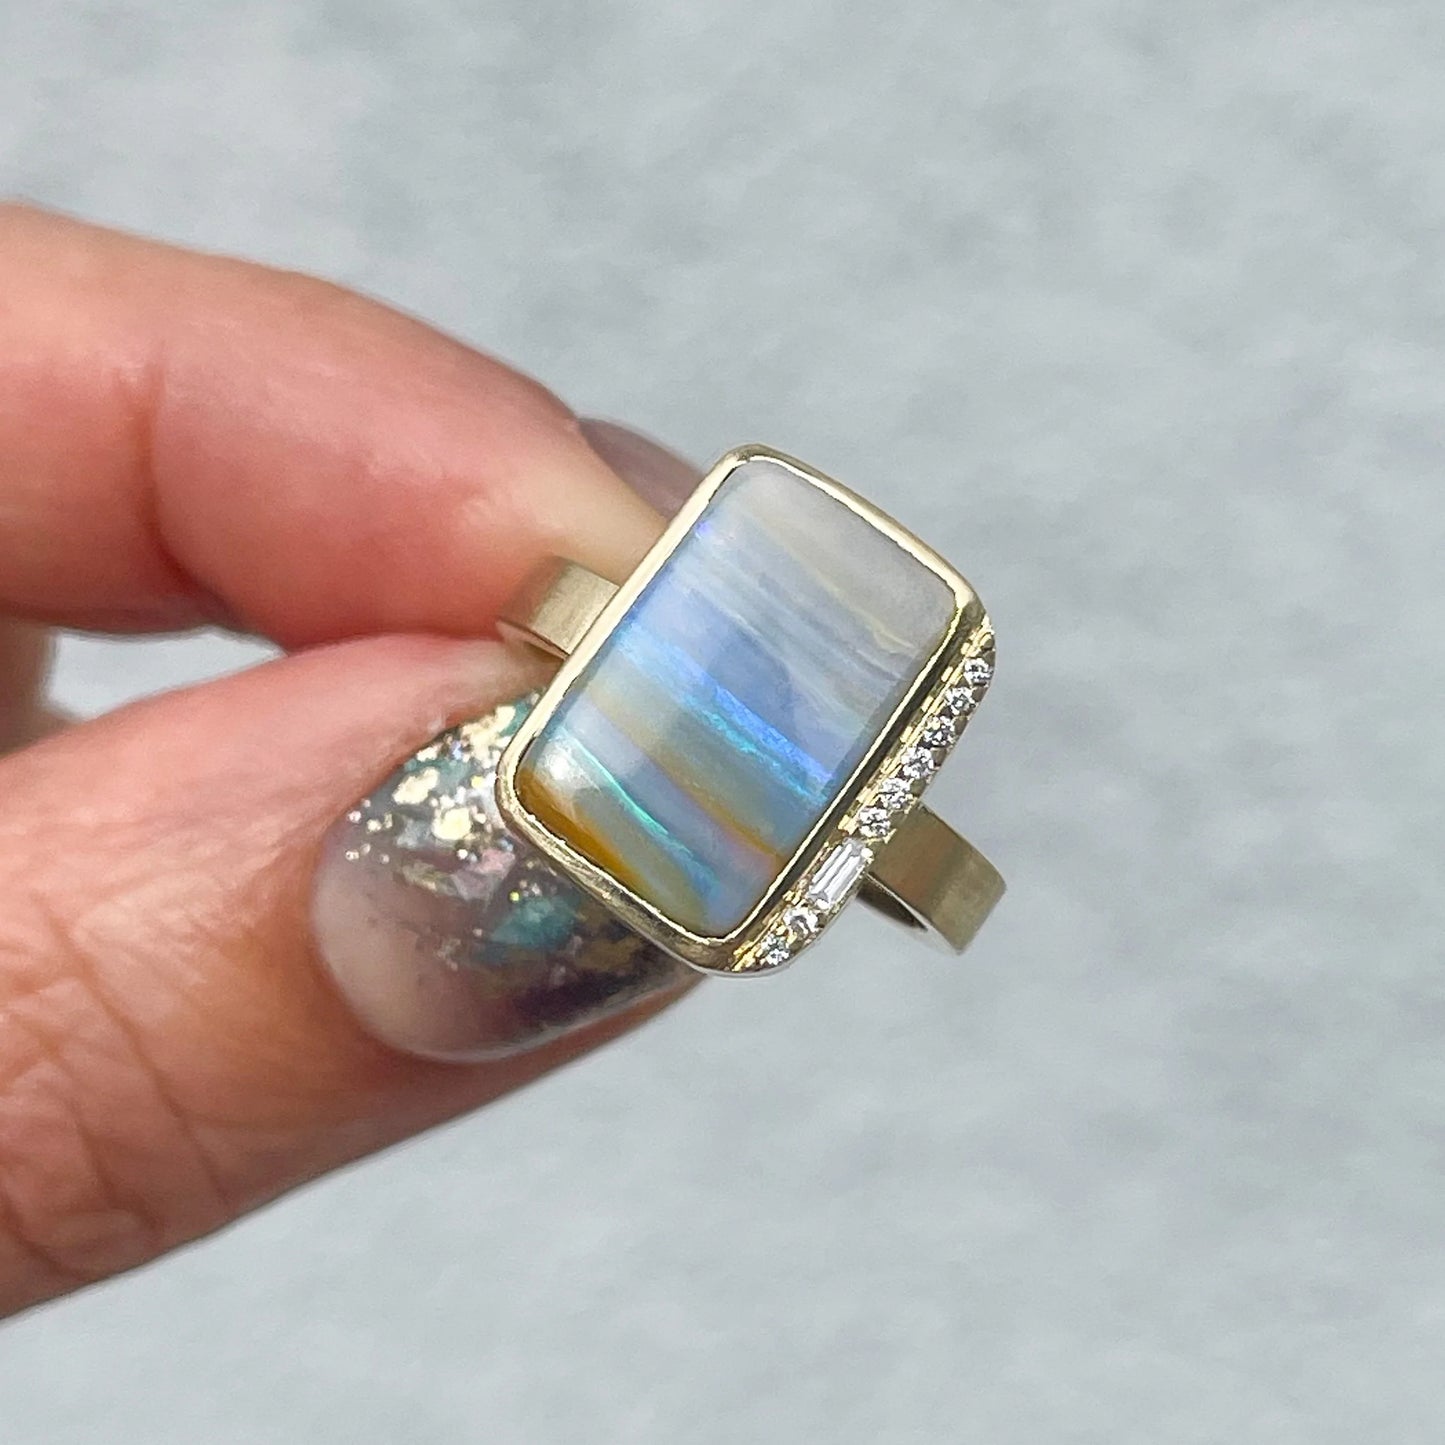 An Australian Opal Ring by NIXIN Jewelry with a blue green opal and pave diamonds is held in front of a grey wall.